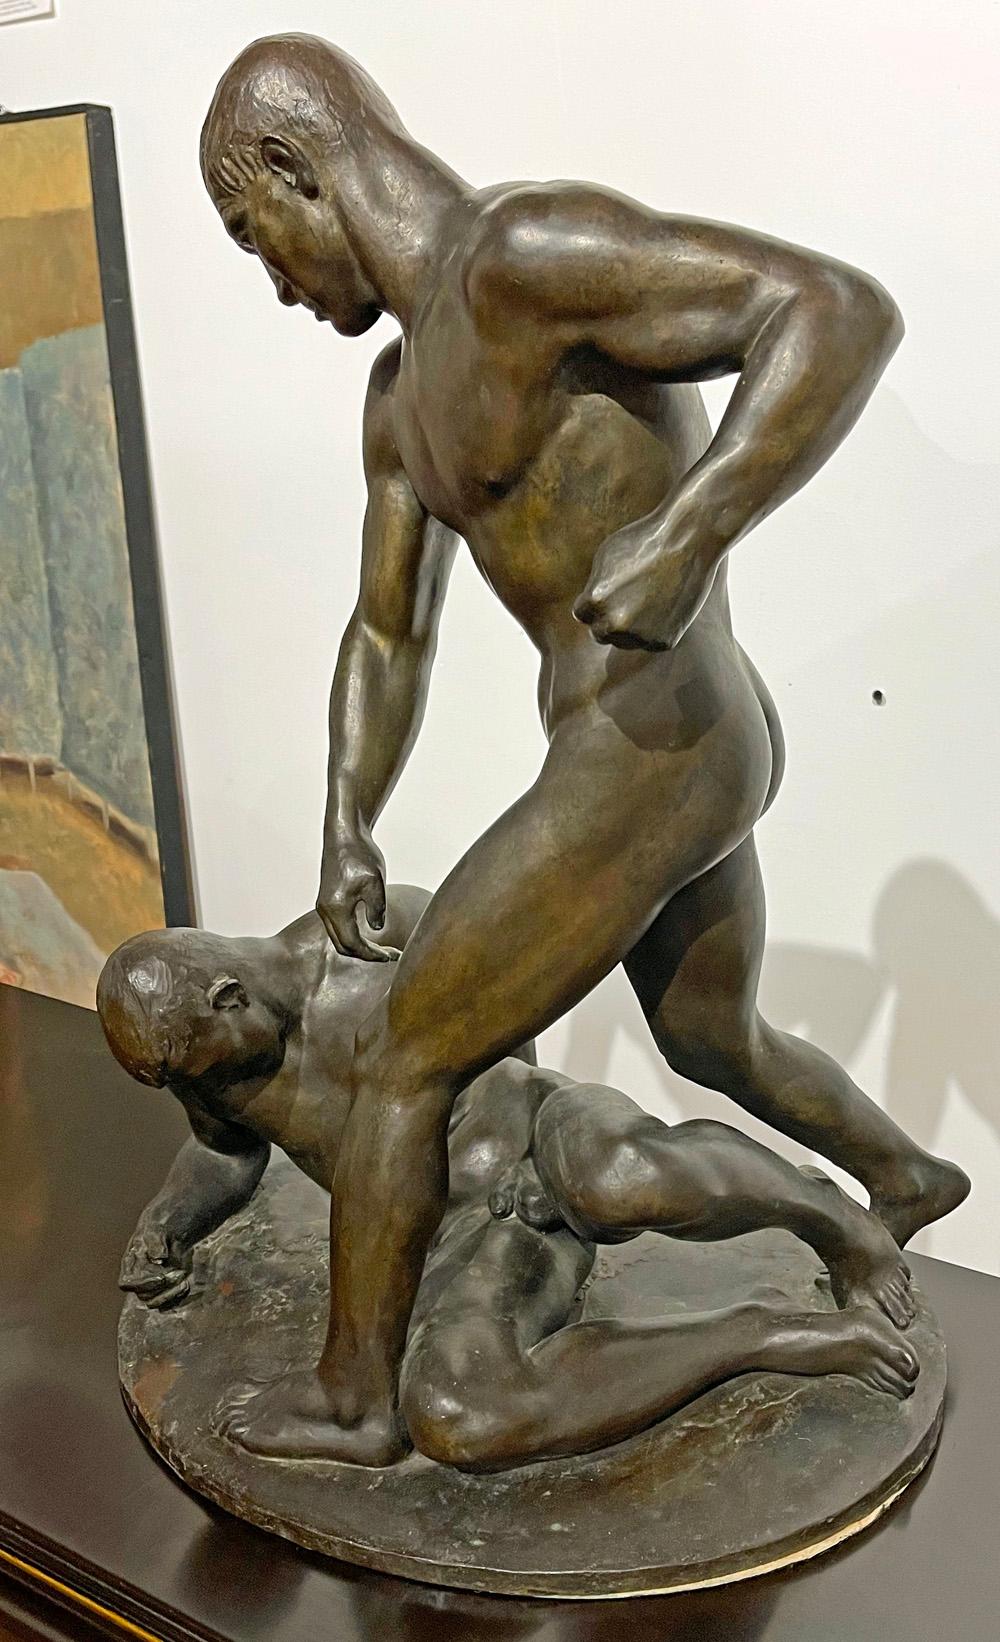 One of the most celebrated figural sculptures of the 20th century, and one of the finest depictions of the male figure from the 1920s and 30s, this extremely rare bronze by Cecil de Blaquiere Howard depicts two boxers, one triumphant and one